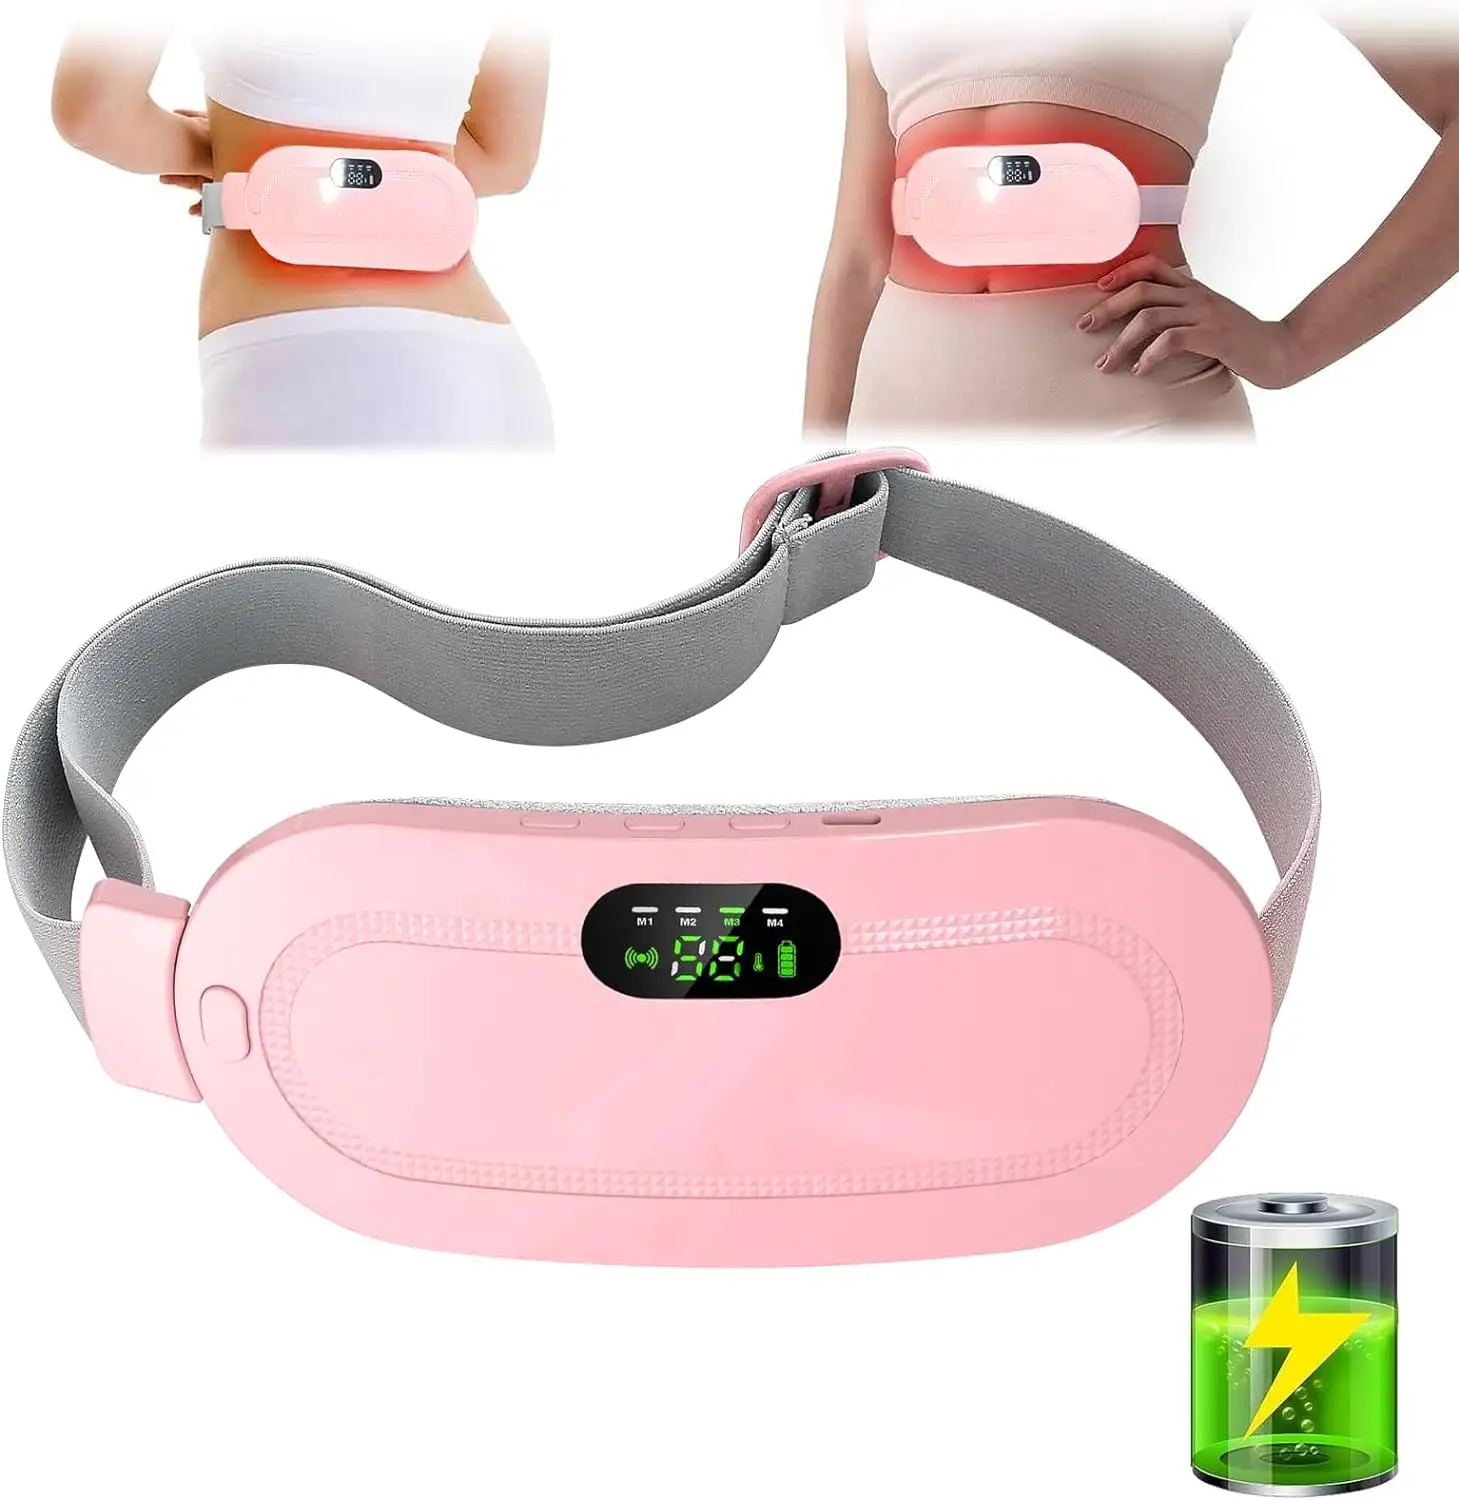 2023 Hot Selling Menstruation Heating Pad Vibration Period Cramp Massager Waist Heating Belt for Period Pain Relief